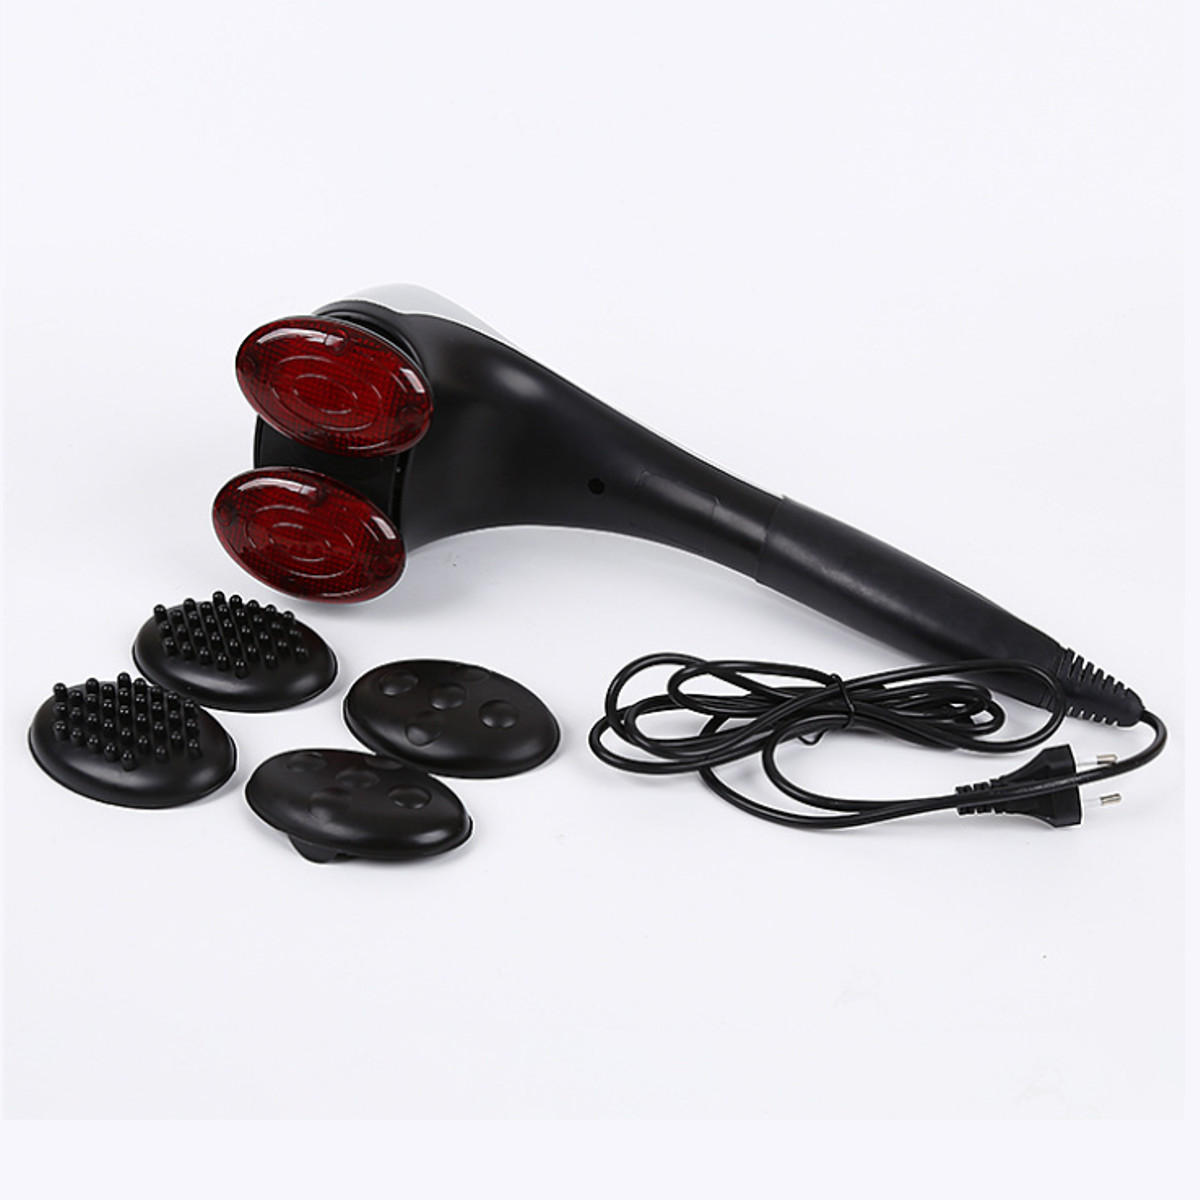 

Handheld Electric Body Infrared Heated Massager Neck Back Waist Leg Cervical Massage Pain Relief Therapy Device with 4 H